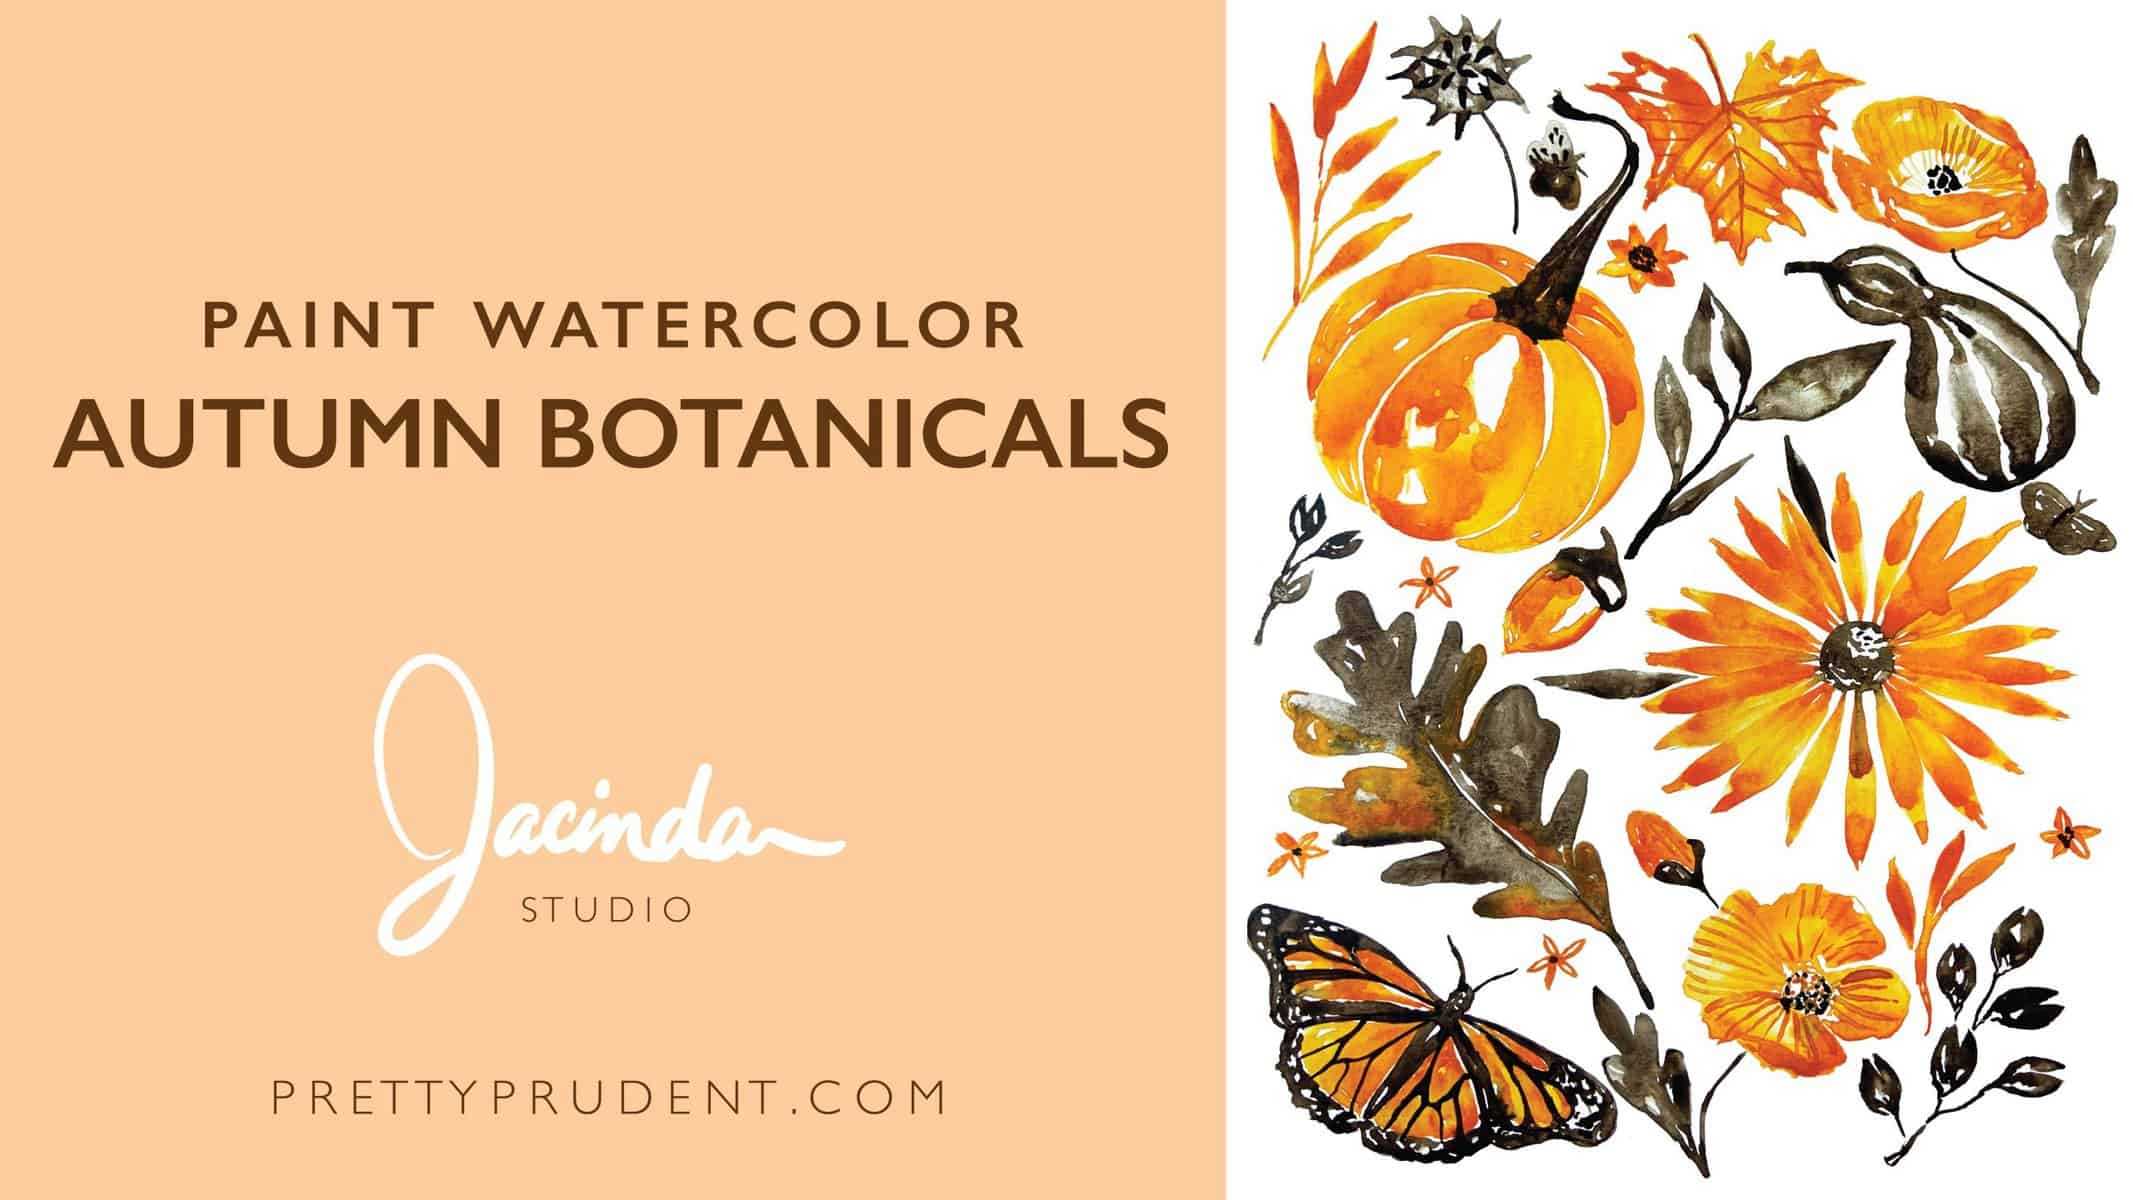 How to Watercolor Paint Autumn Botanicals Tutorial